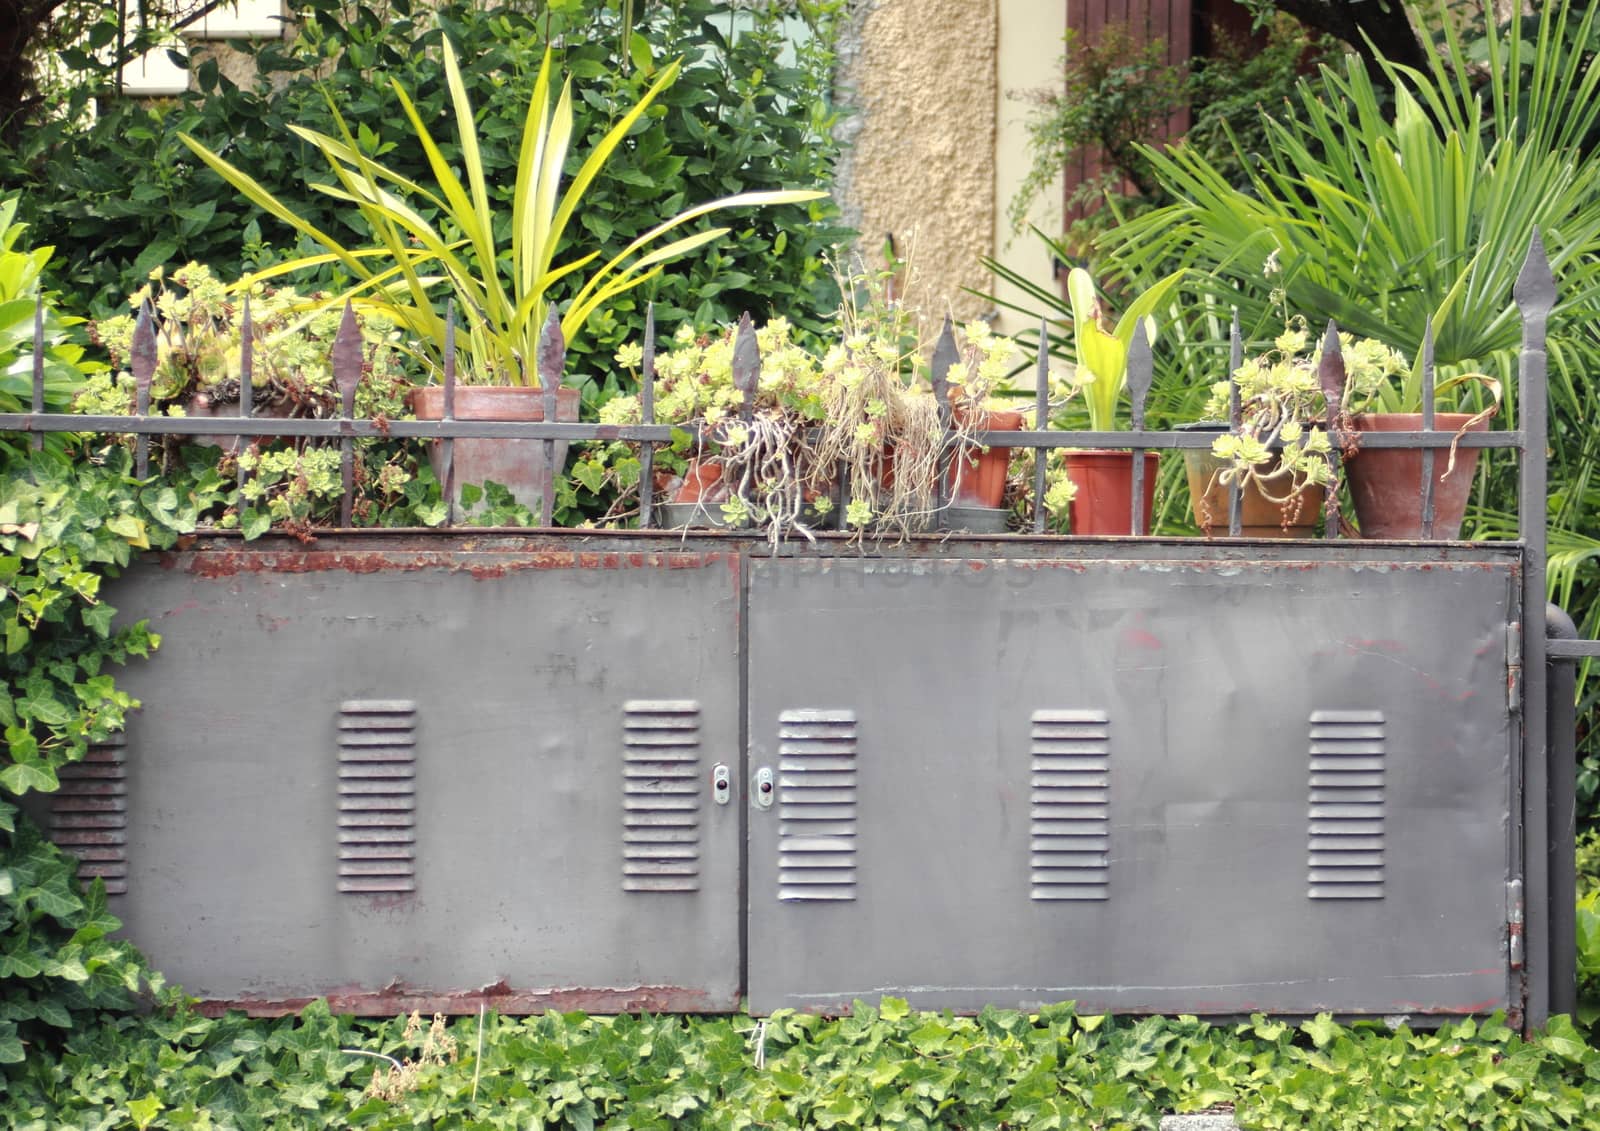 Plants and pots on an eletrical box outside